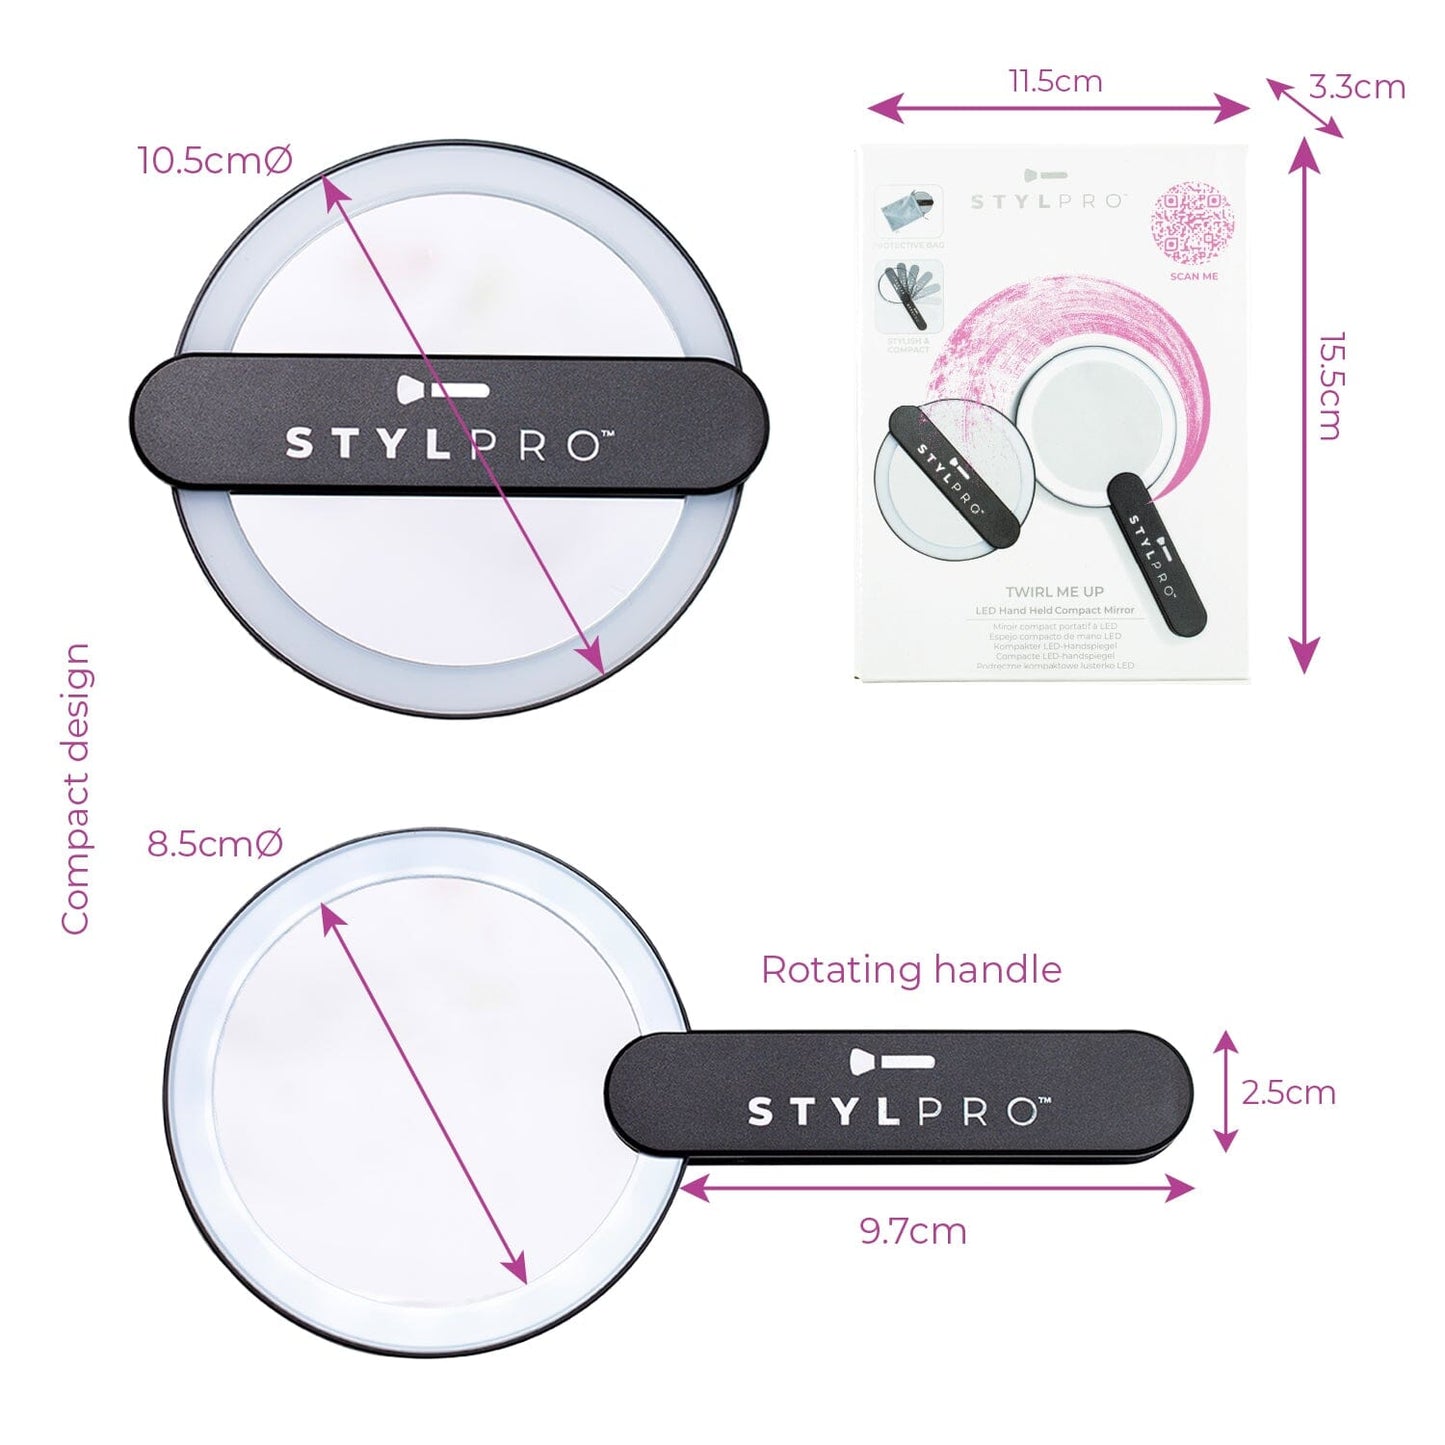 STYLPRO Twirl Me Up Hand Held Mirror